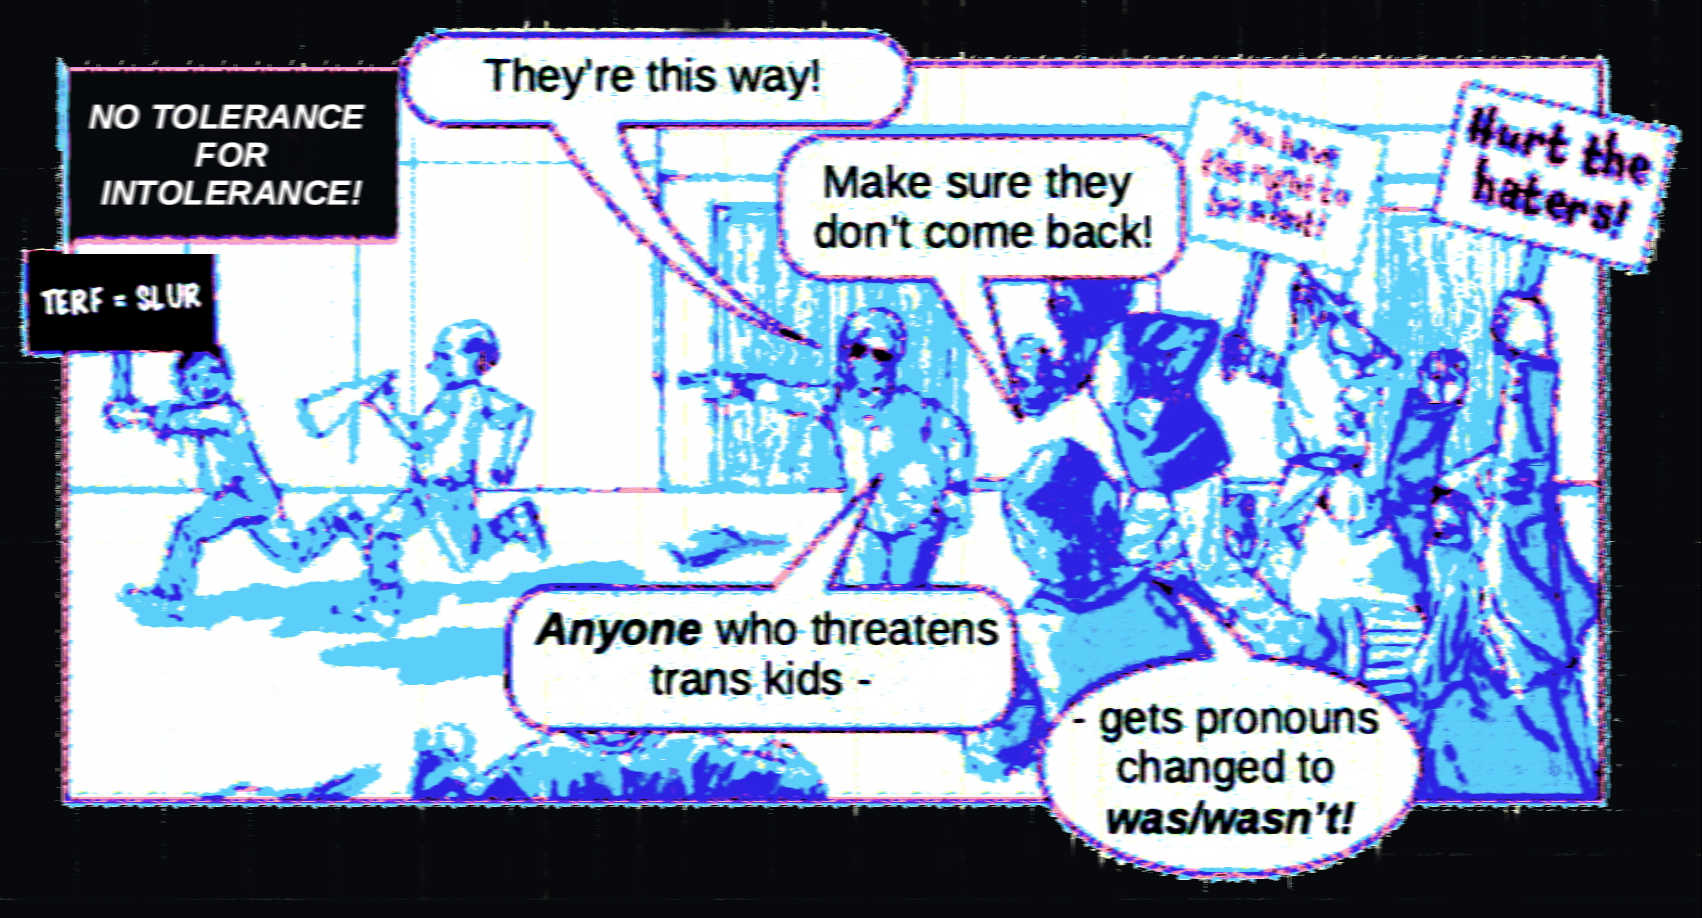 The drawing is in colors of the trans pride flag. A group of people are chasing away two people, one is a man carrying a megaphone and the other is a person carrying a sign reading, 'TERF = slur.' The pursuers are carrying the signs 'You have the right to be silent!' and 'Hurt the haters!' They say to each other, 'They're this way! Make sure they don't come back! Anyone who threatens trans kids - gets pronouns changed to was/wasn't!' The caption in the top left corner says 'No tolerance for intolerance!'